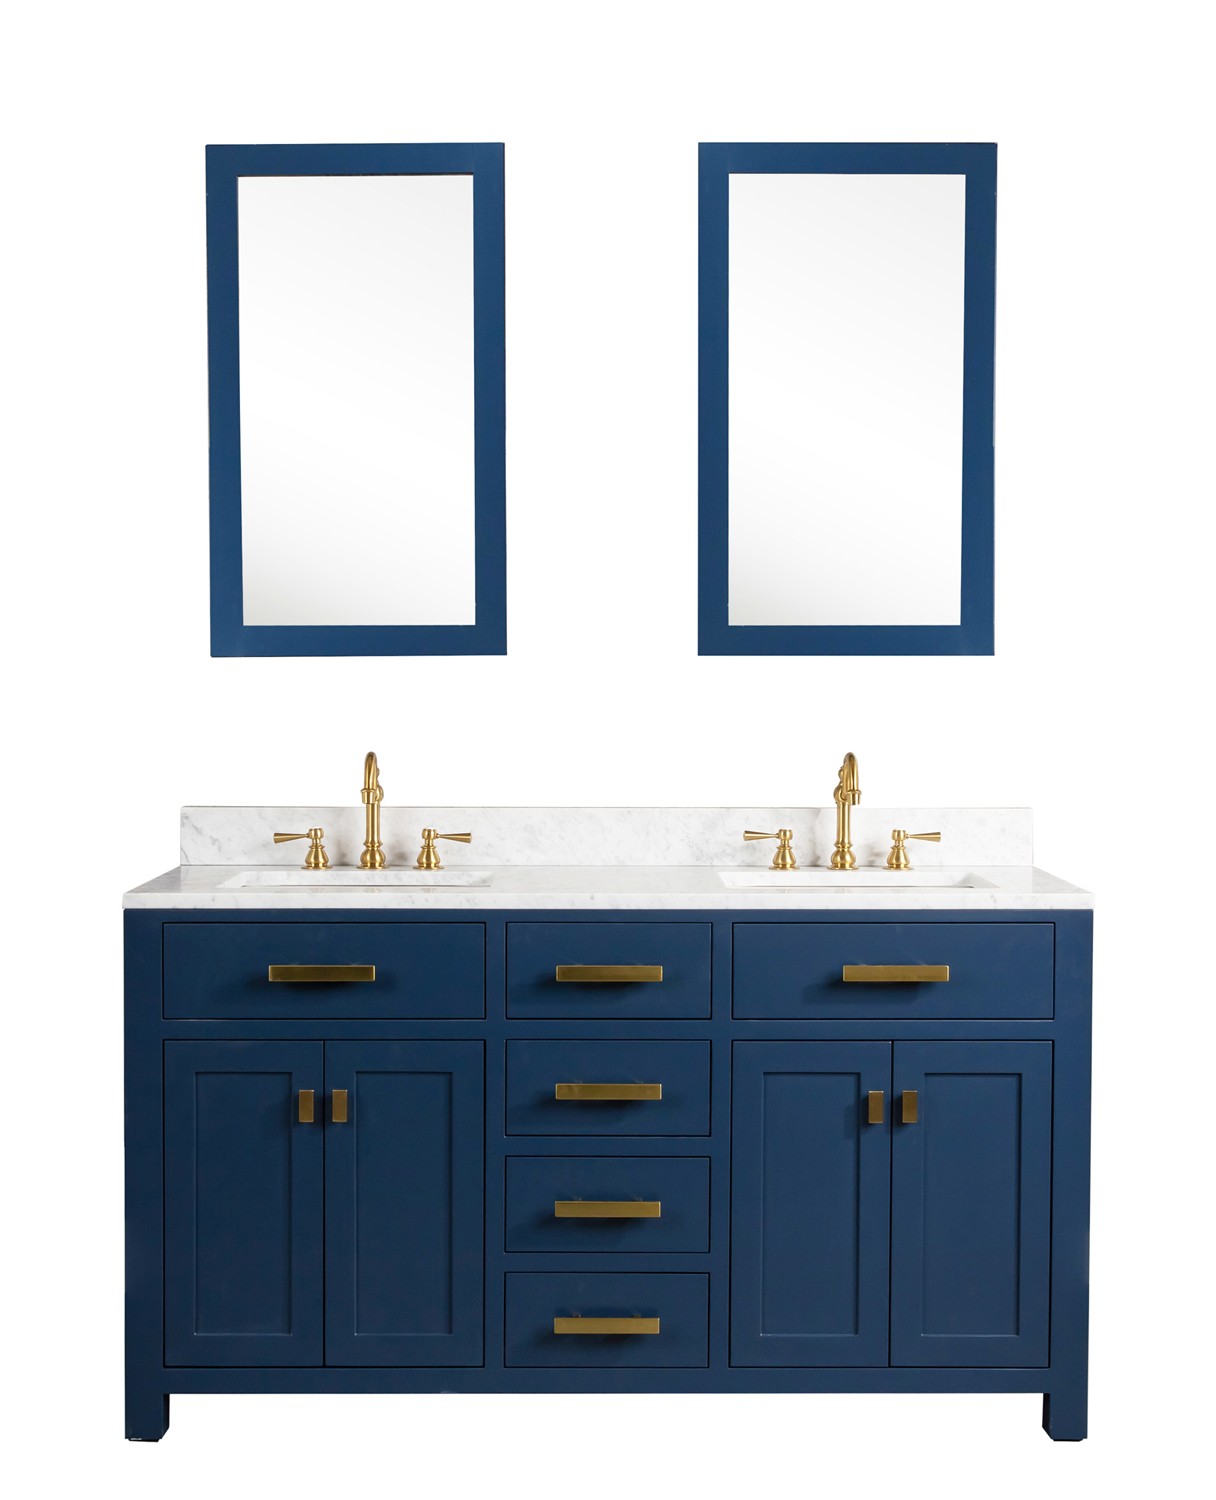 Madison 60-Inch Double Sink Carrara White Marble Vanity In Monarch BlueWith F2-0012-06-TL Lavatory Faucet(s)